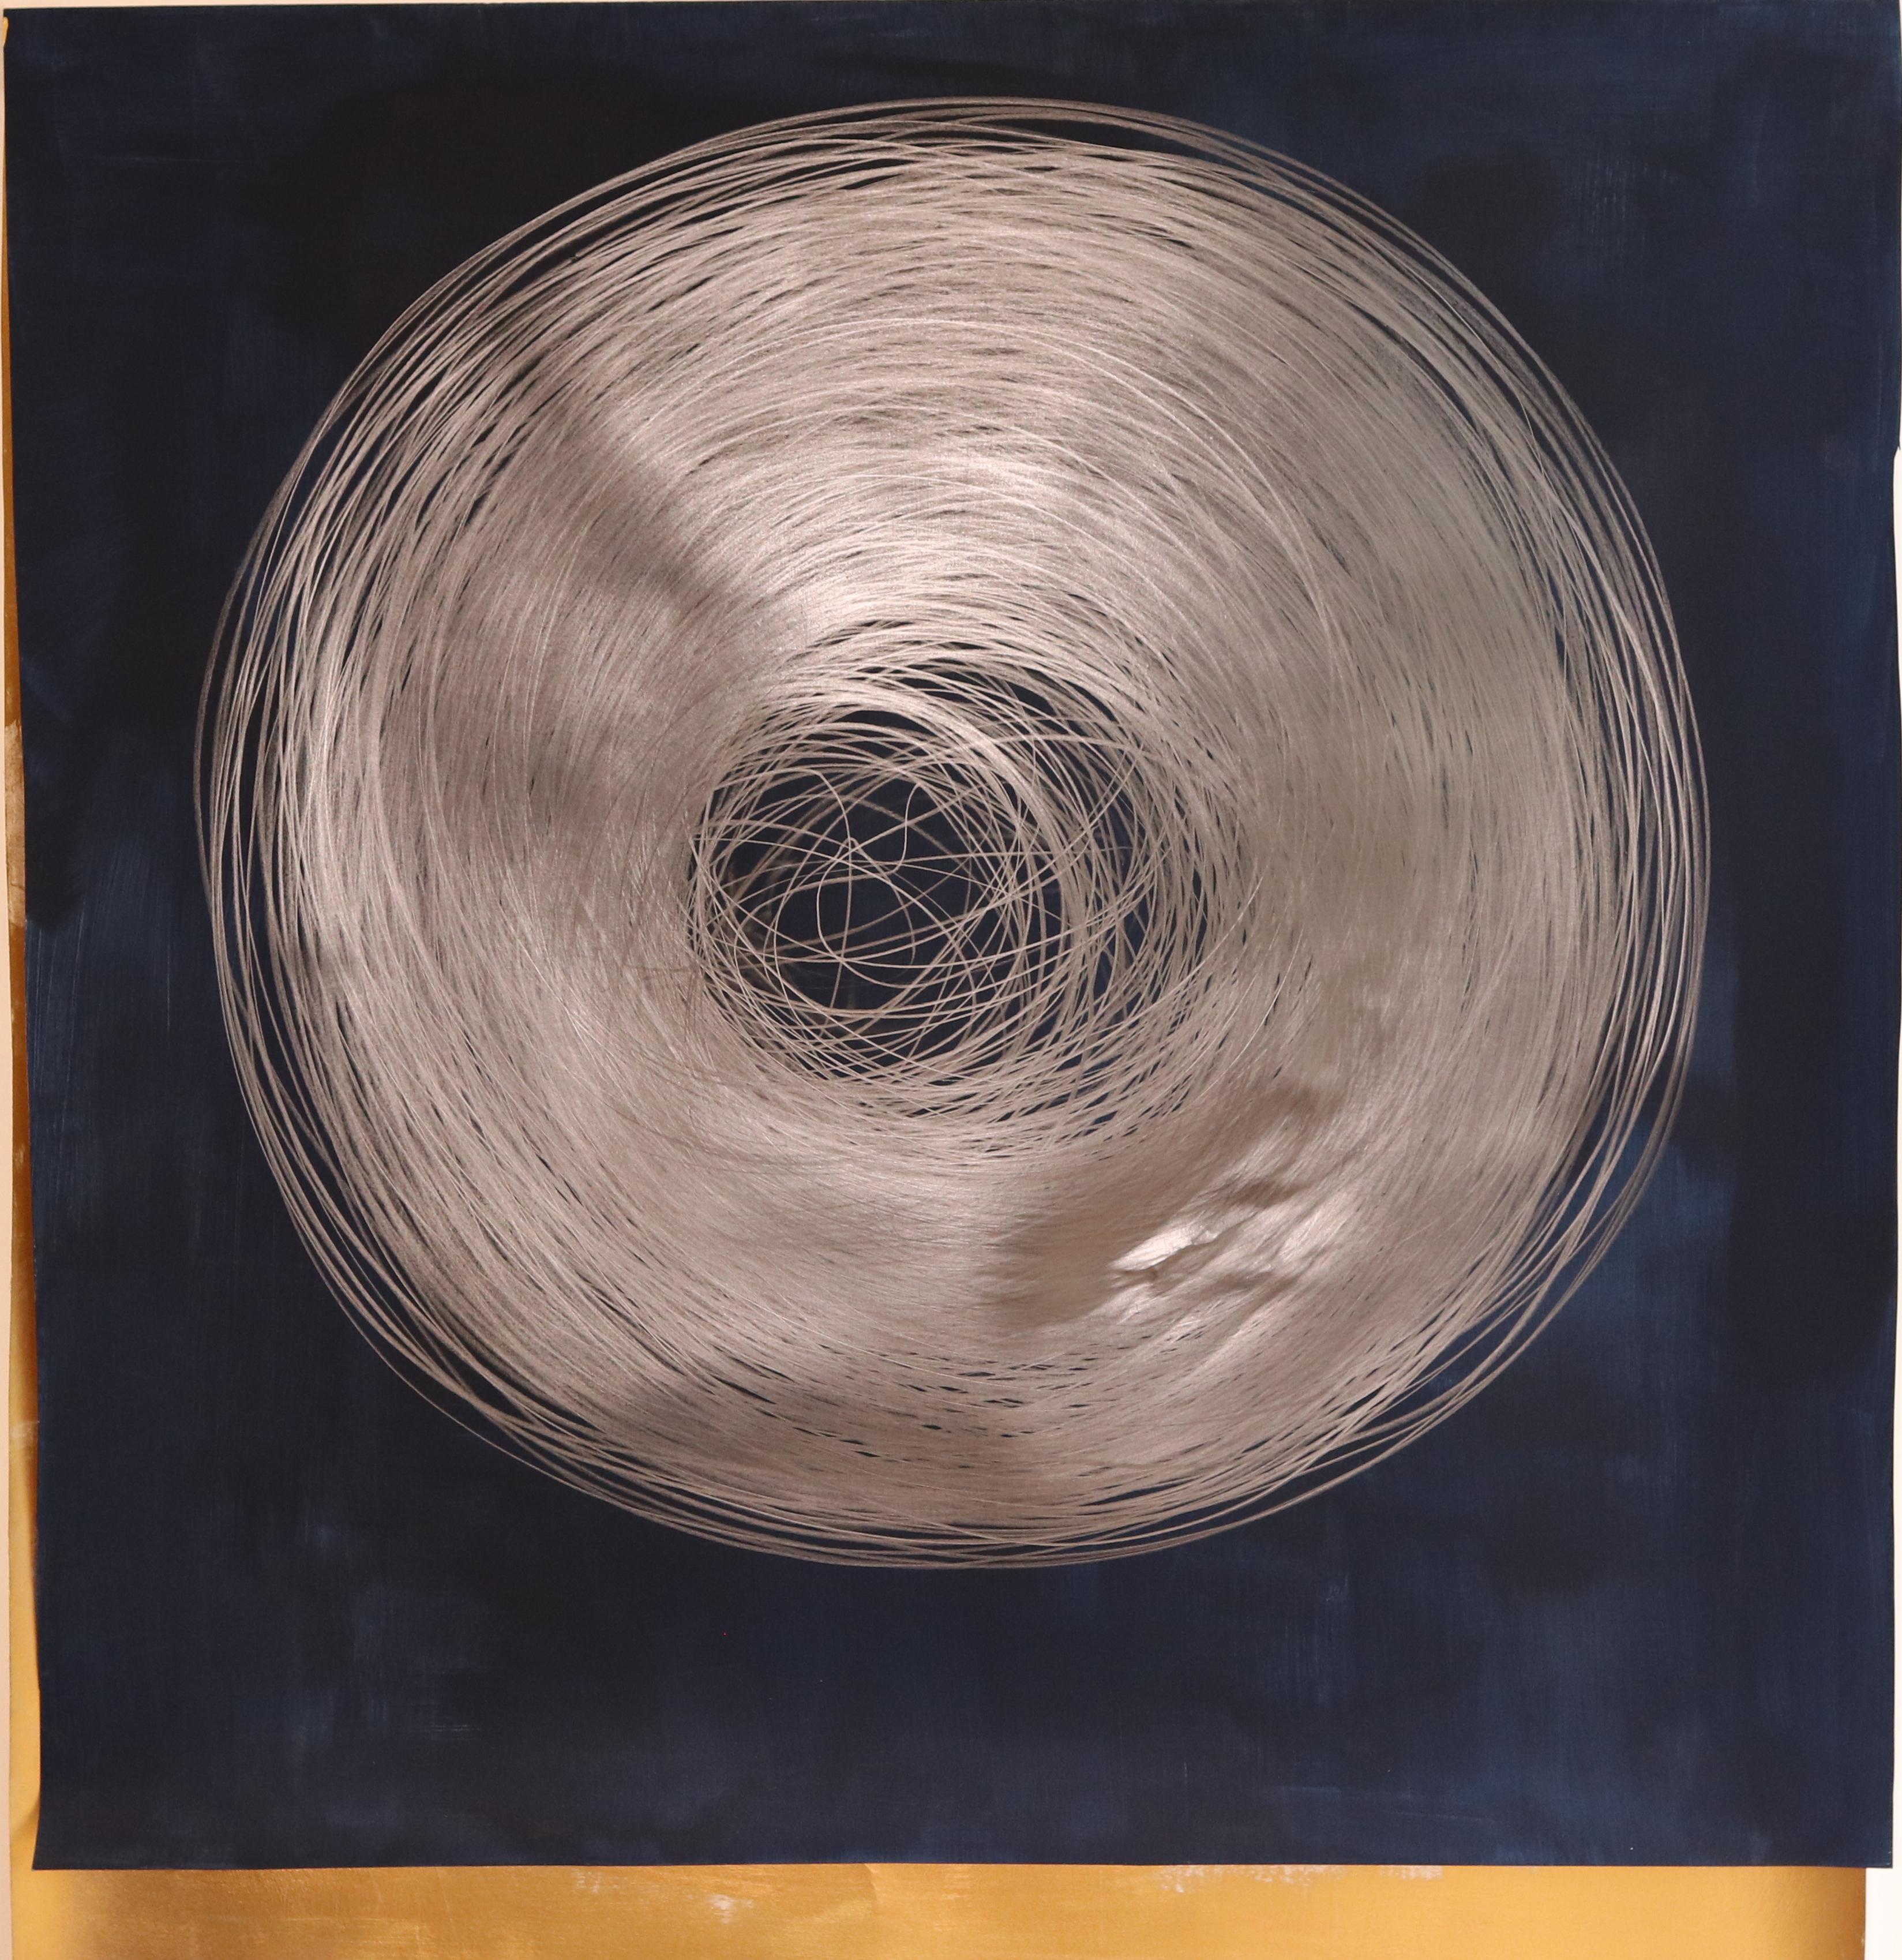 'Work no. 1 (Circle Drawing), Blue / Gold, 2018’ graphite, gouache and 23ct gold leaf on 315gsm Heritage Fine Art Paper by Carali McCall (born 1981).  

McCall began her ‘Circle Drawing' artworks in 2004 where she focuses on the durational element